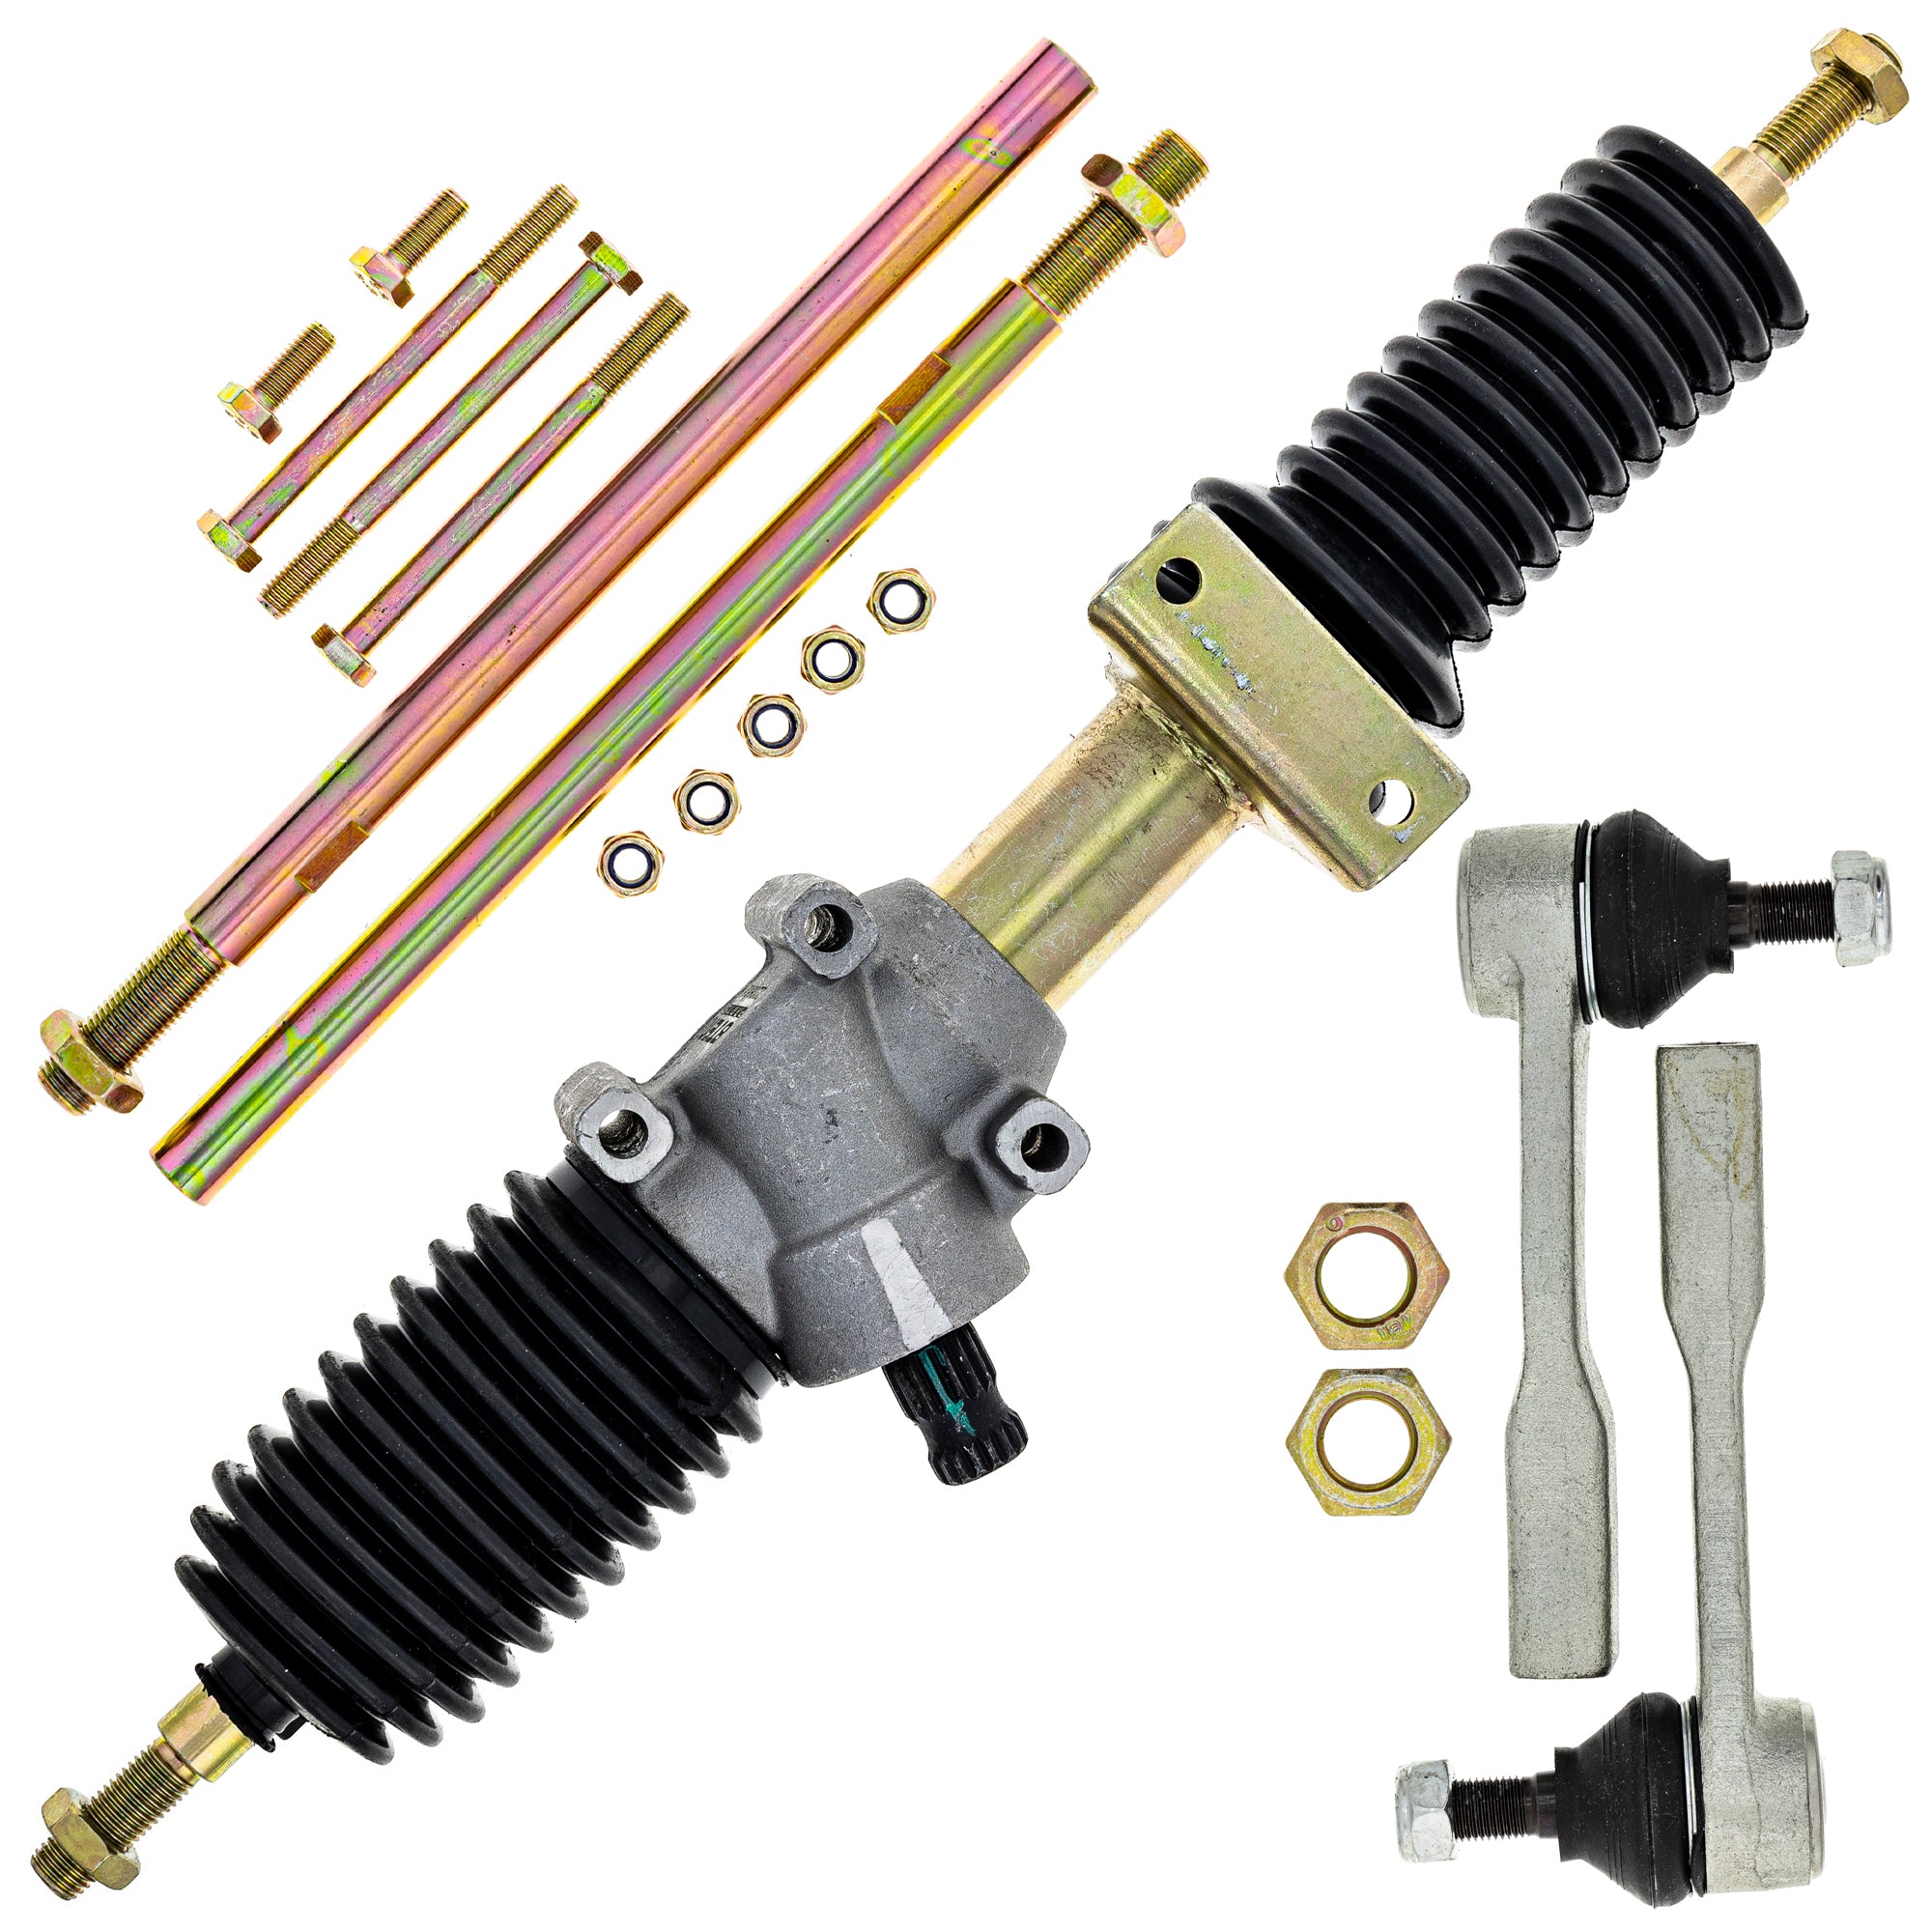 Steering Rack Assembly & Tie Rods Kit for zOTHER Polaris RZR Ranger General NICHE MK1009495